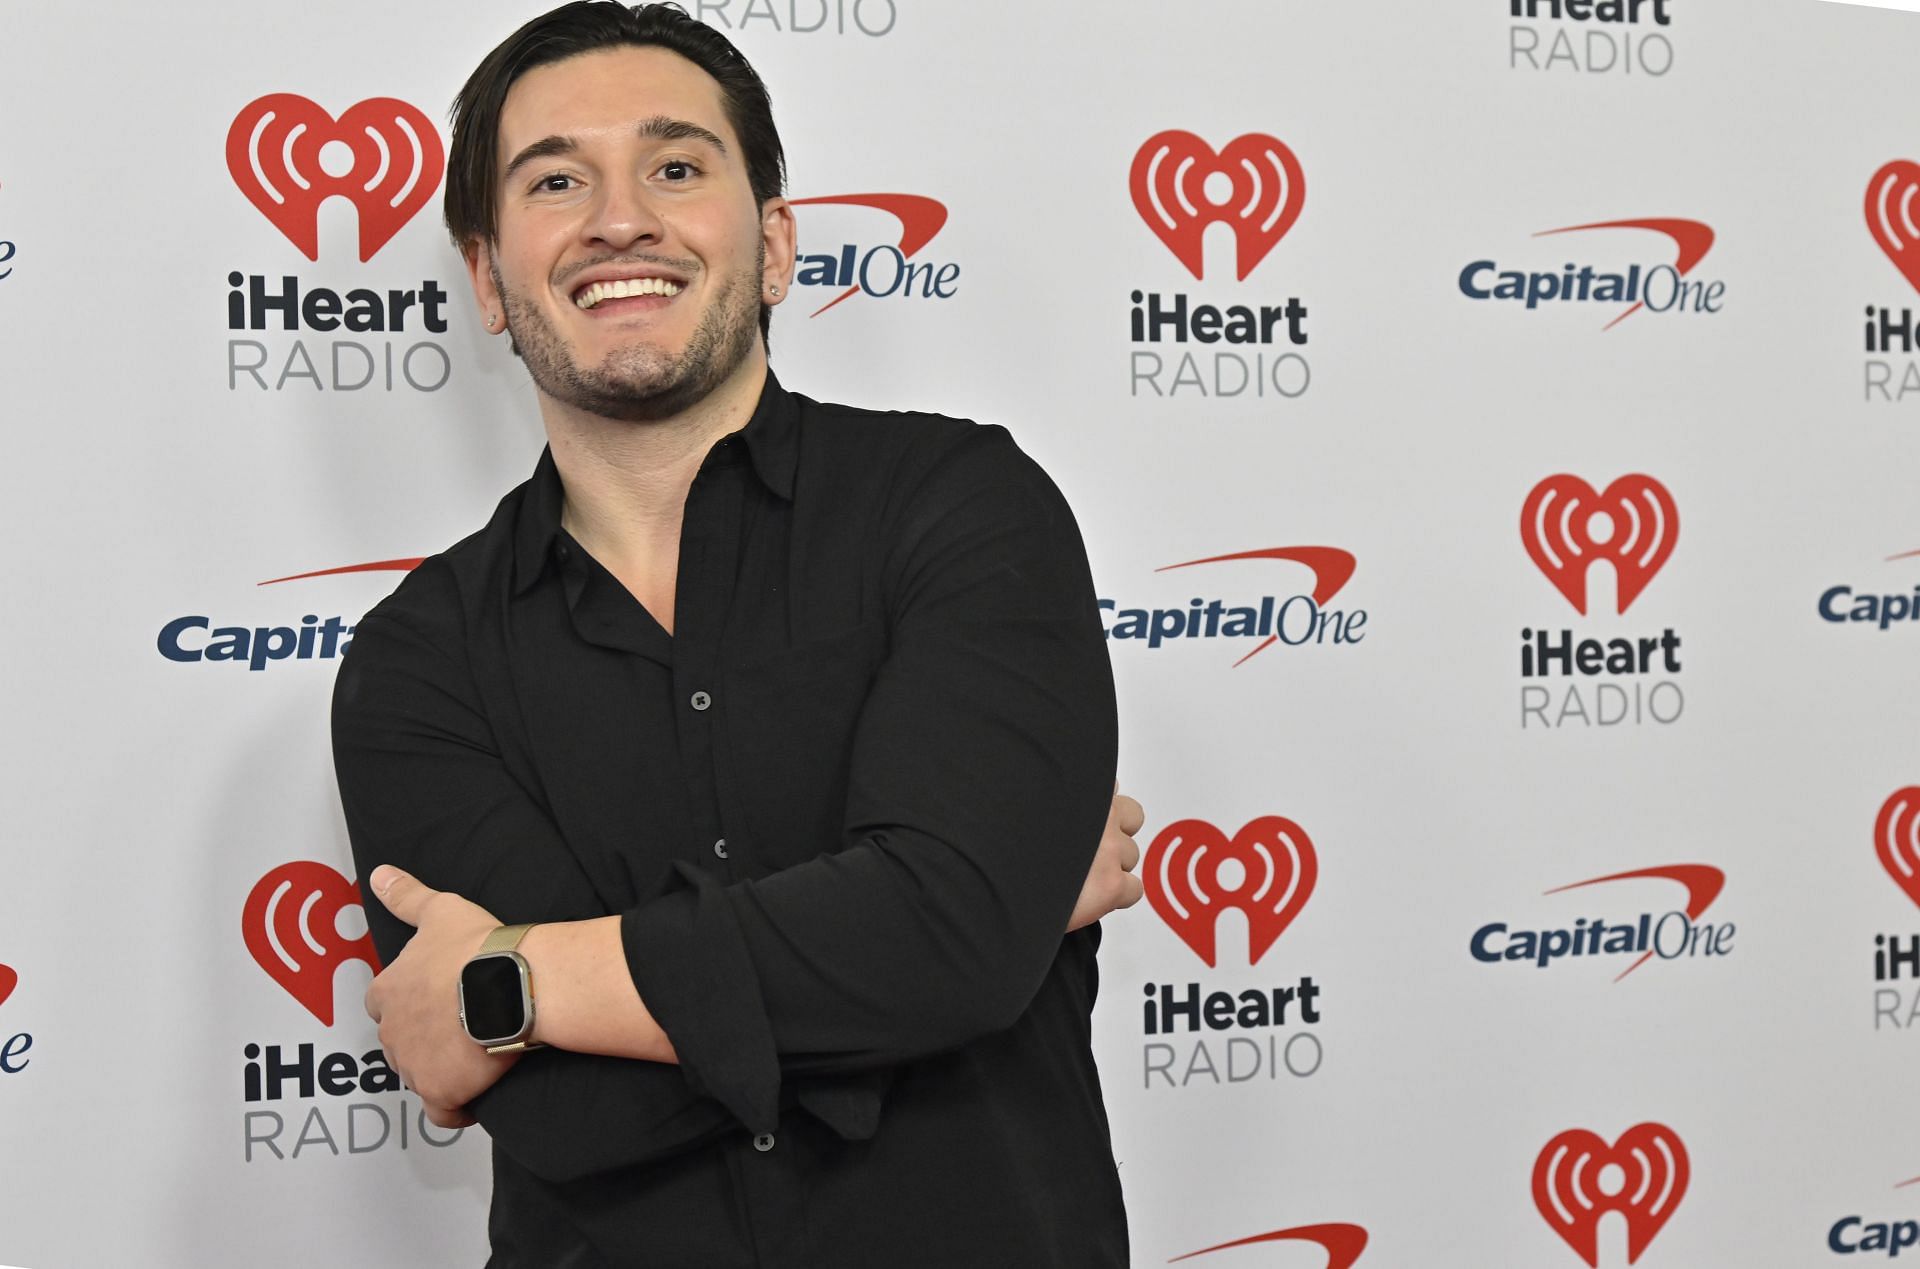 Joey Sasso at the 2023 iHeartRadio Music Festival - Night 2 - Arrivals (Image via Getty Images)